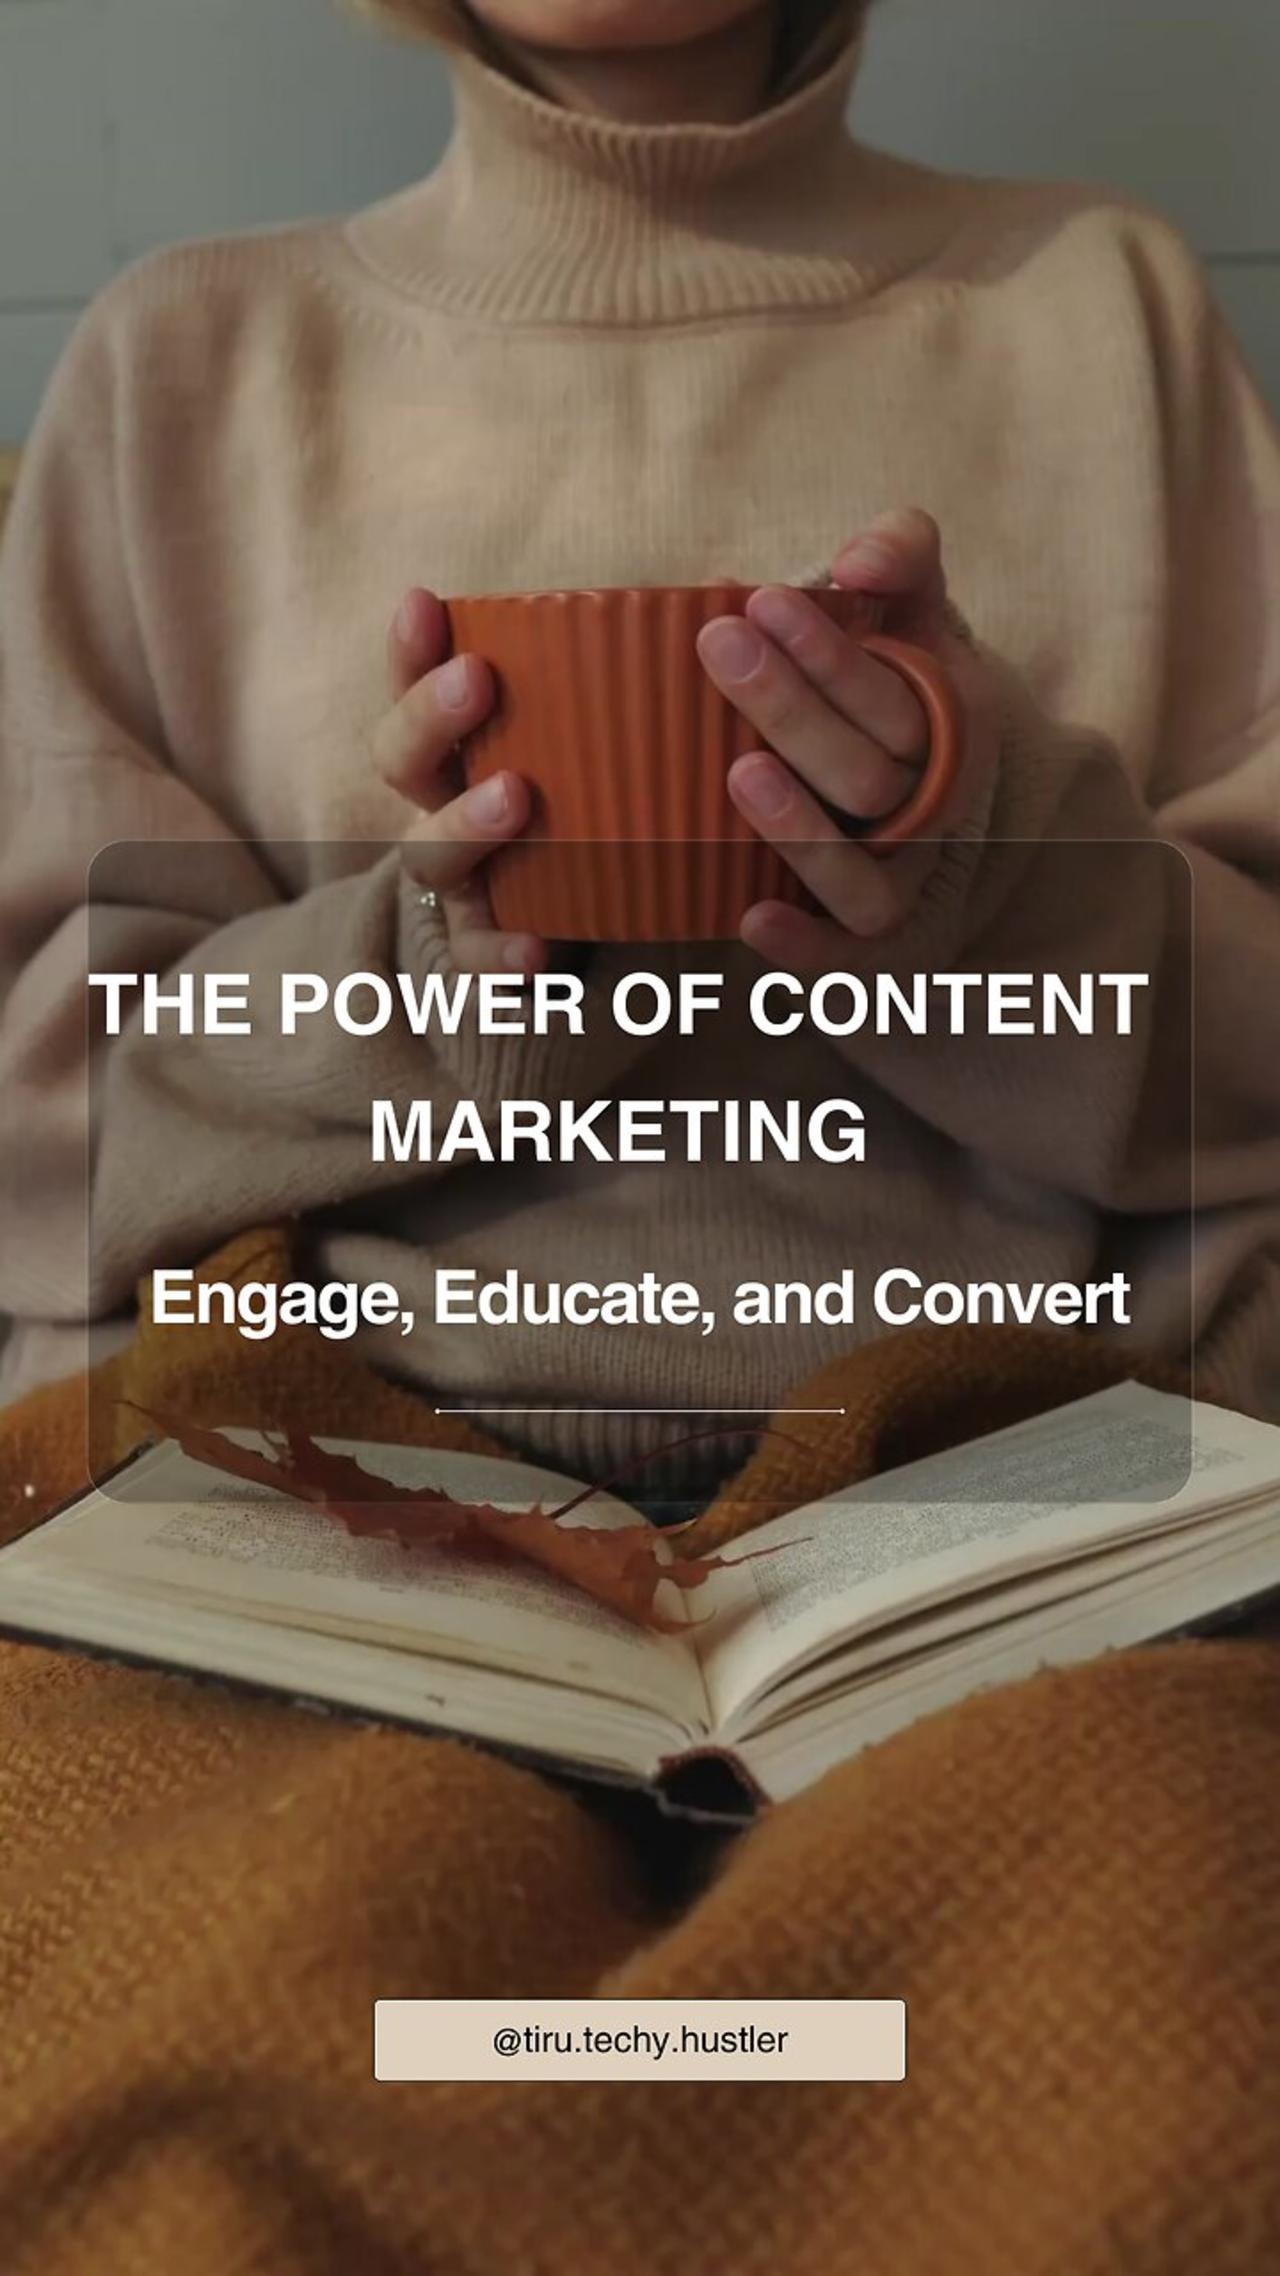 The Power of Content Marketing: Engage, Educate, and Convert